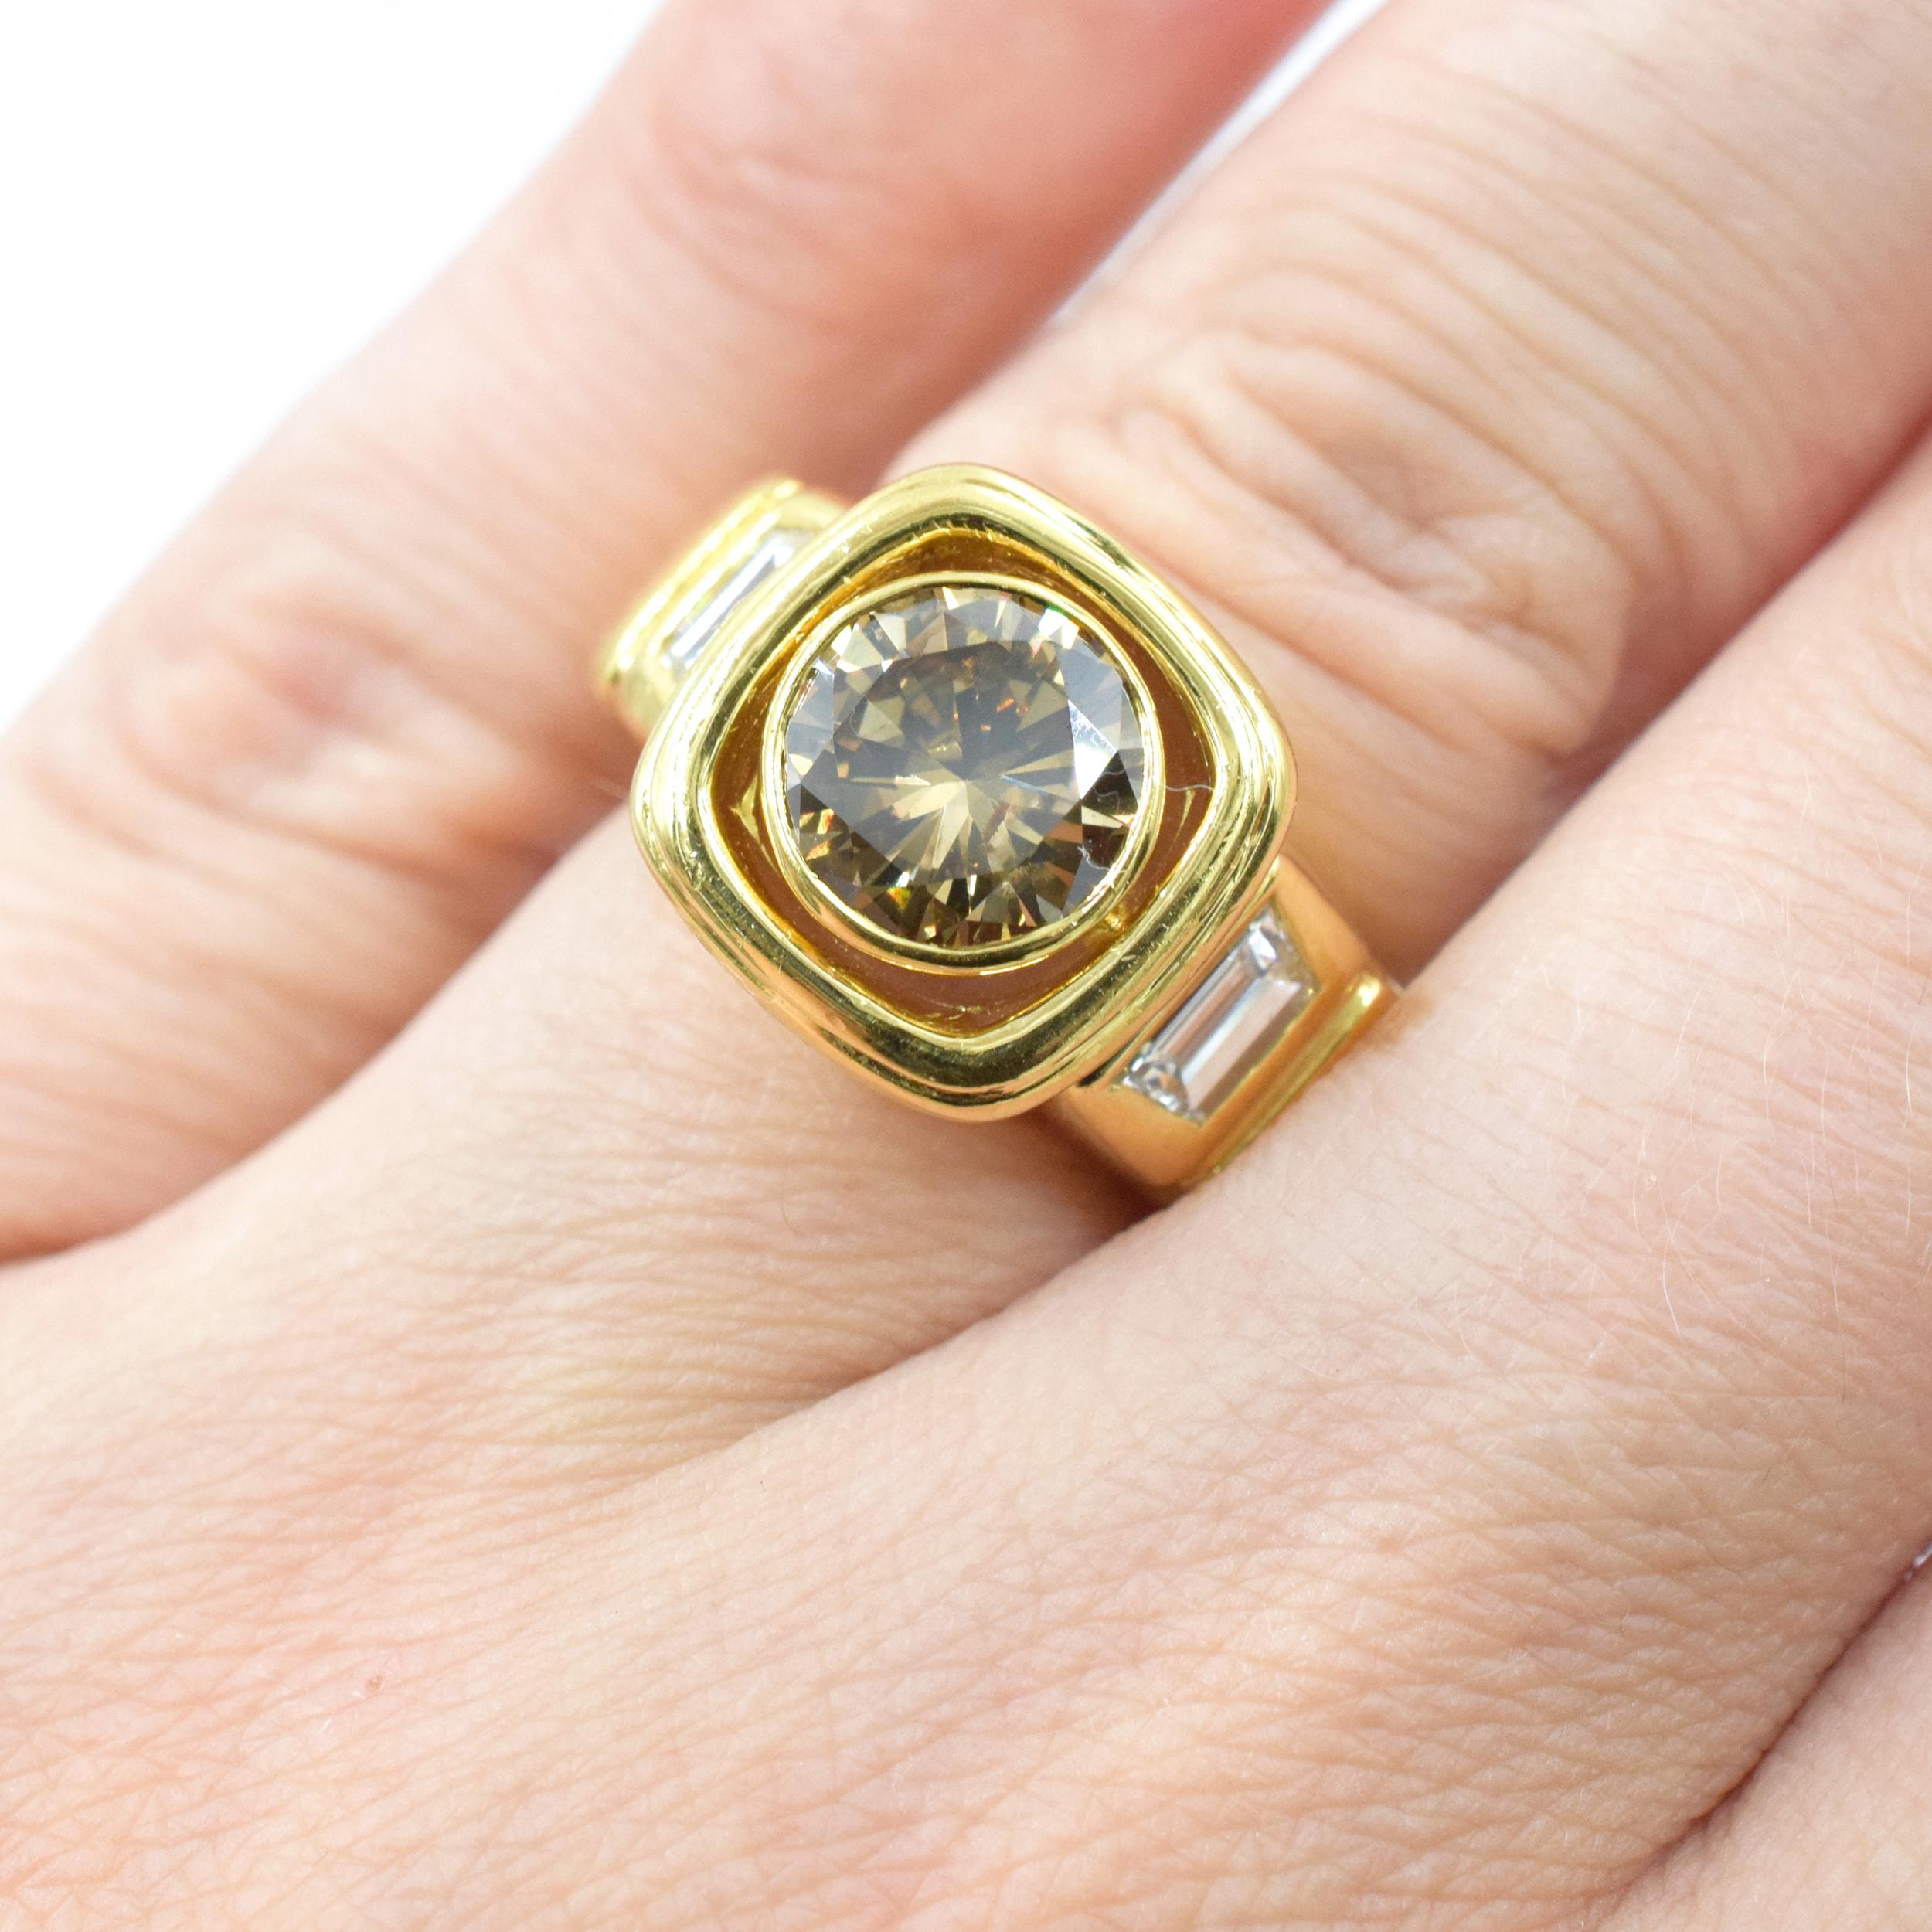 Van Cleef & Arpels champagne and white color diamond ring in 18k yellow gold. Center of this substantial ring is bezel set with round brilliant cut champagne color diamond with a weight of approximately 2.0 carats accented by yellow gold cushion